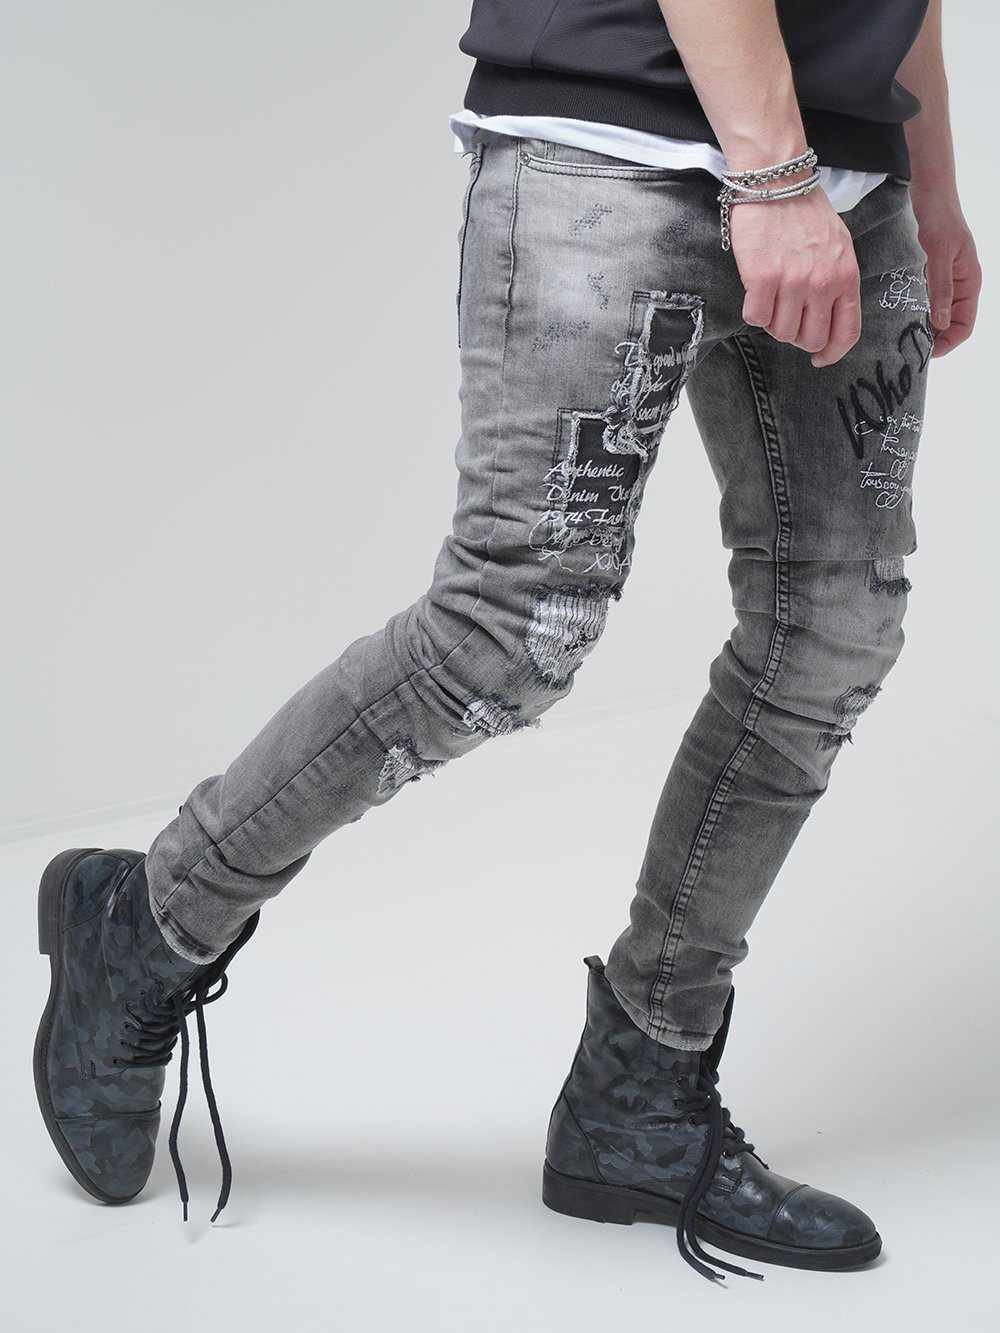 A man wearing ripped jeans in a skinny fit and black boots called LONDON.